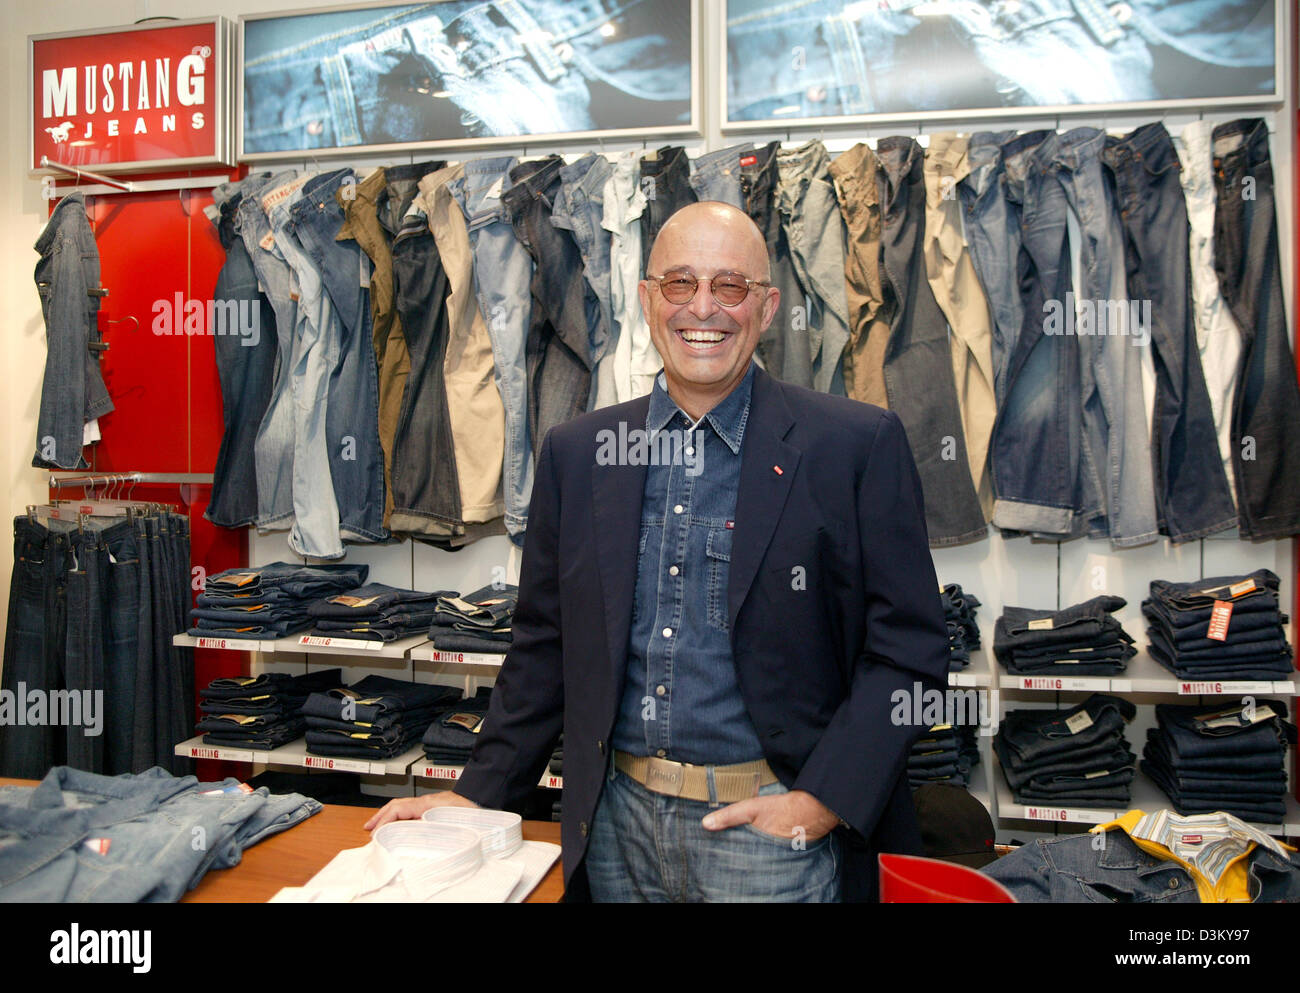 (dpa file) - Heiner Sefranek, CEO of clothing retailer Mustang, stands smiling between shelves with clothing of the denim brand Mustang at the company's headquarter in Kuenzelsau, Germany, 06 April 2005. Photo: Harry Melchert Stock Photo